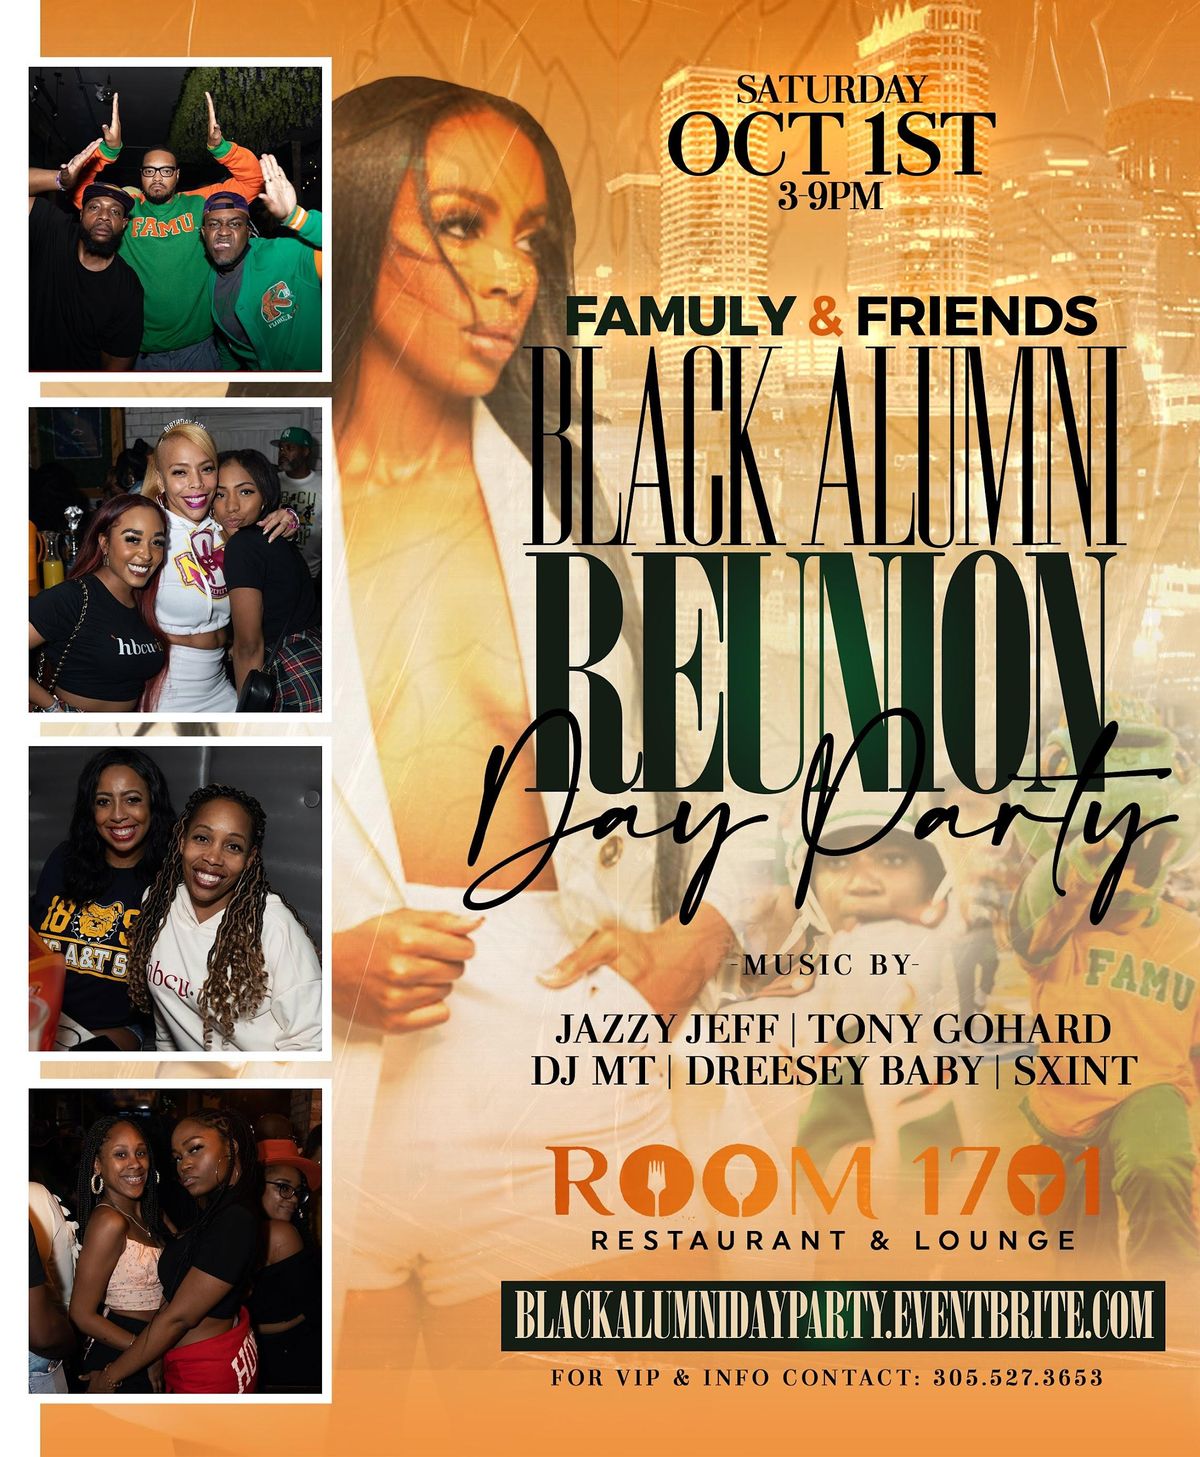 FAMULY & FRIENDS BLACK ALUMNI DAY PARTY